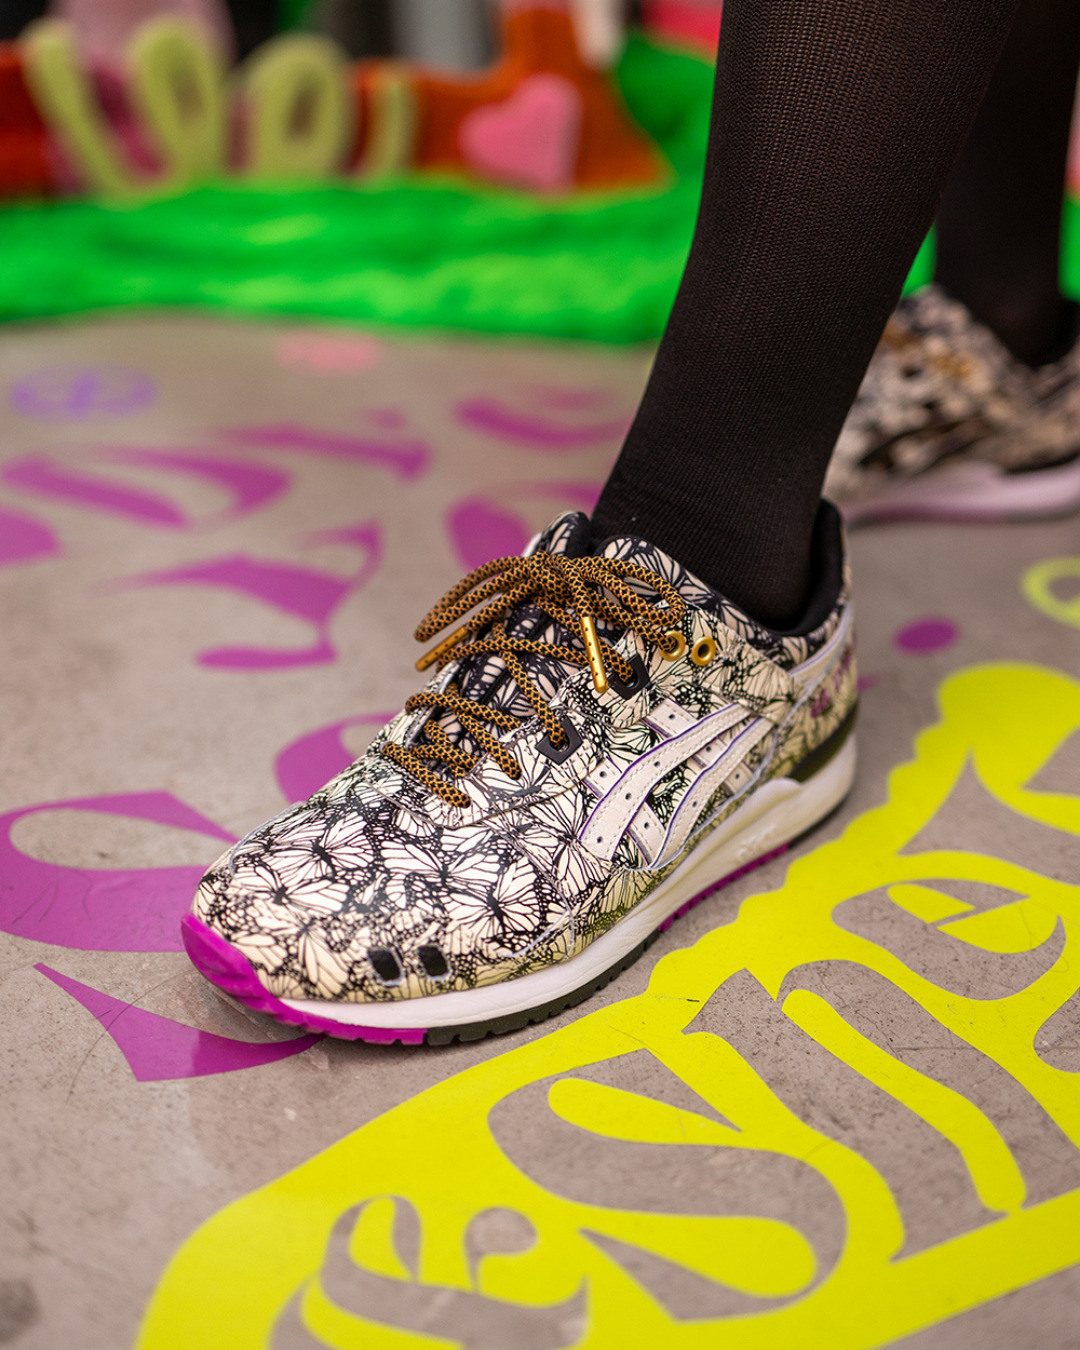 SNKRGIRL Love Party & Sneakers Event vol1 image スニーカーガール イベント ストックエックス